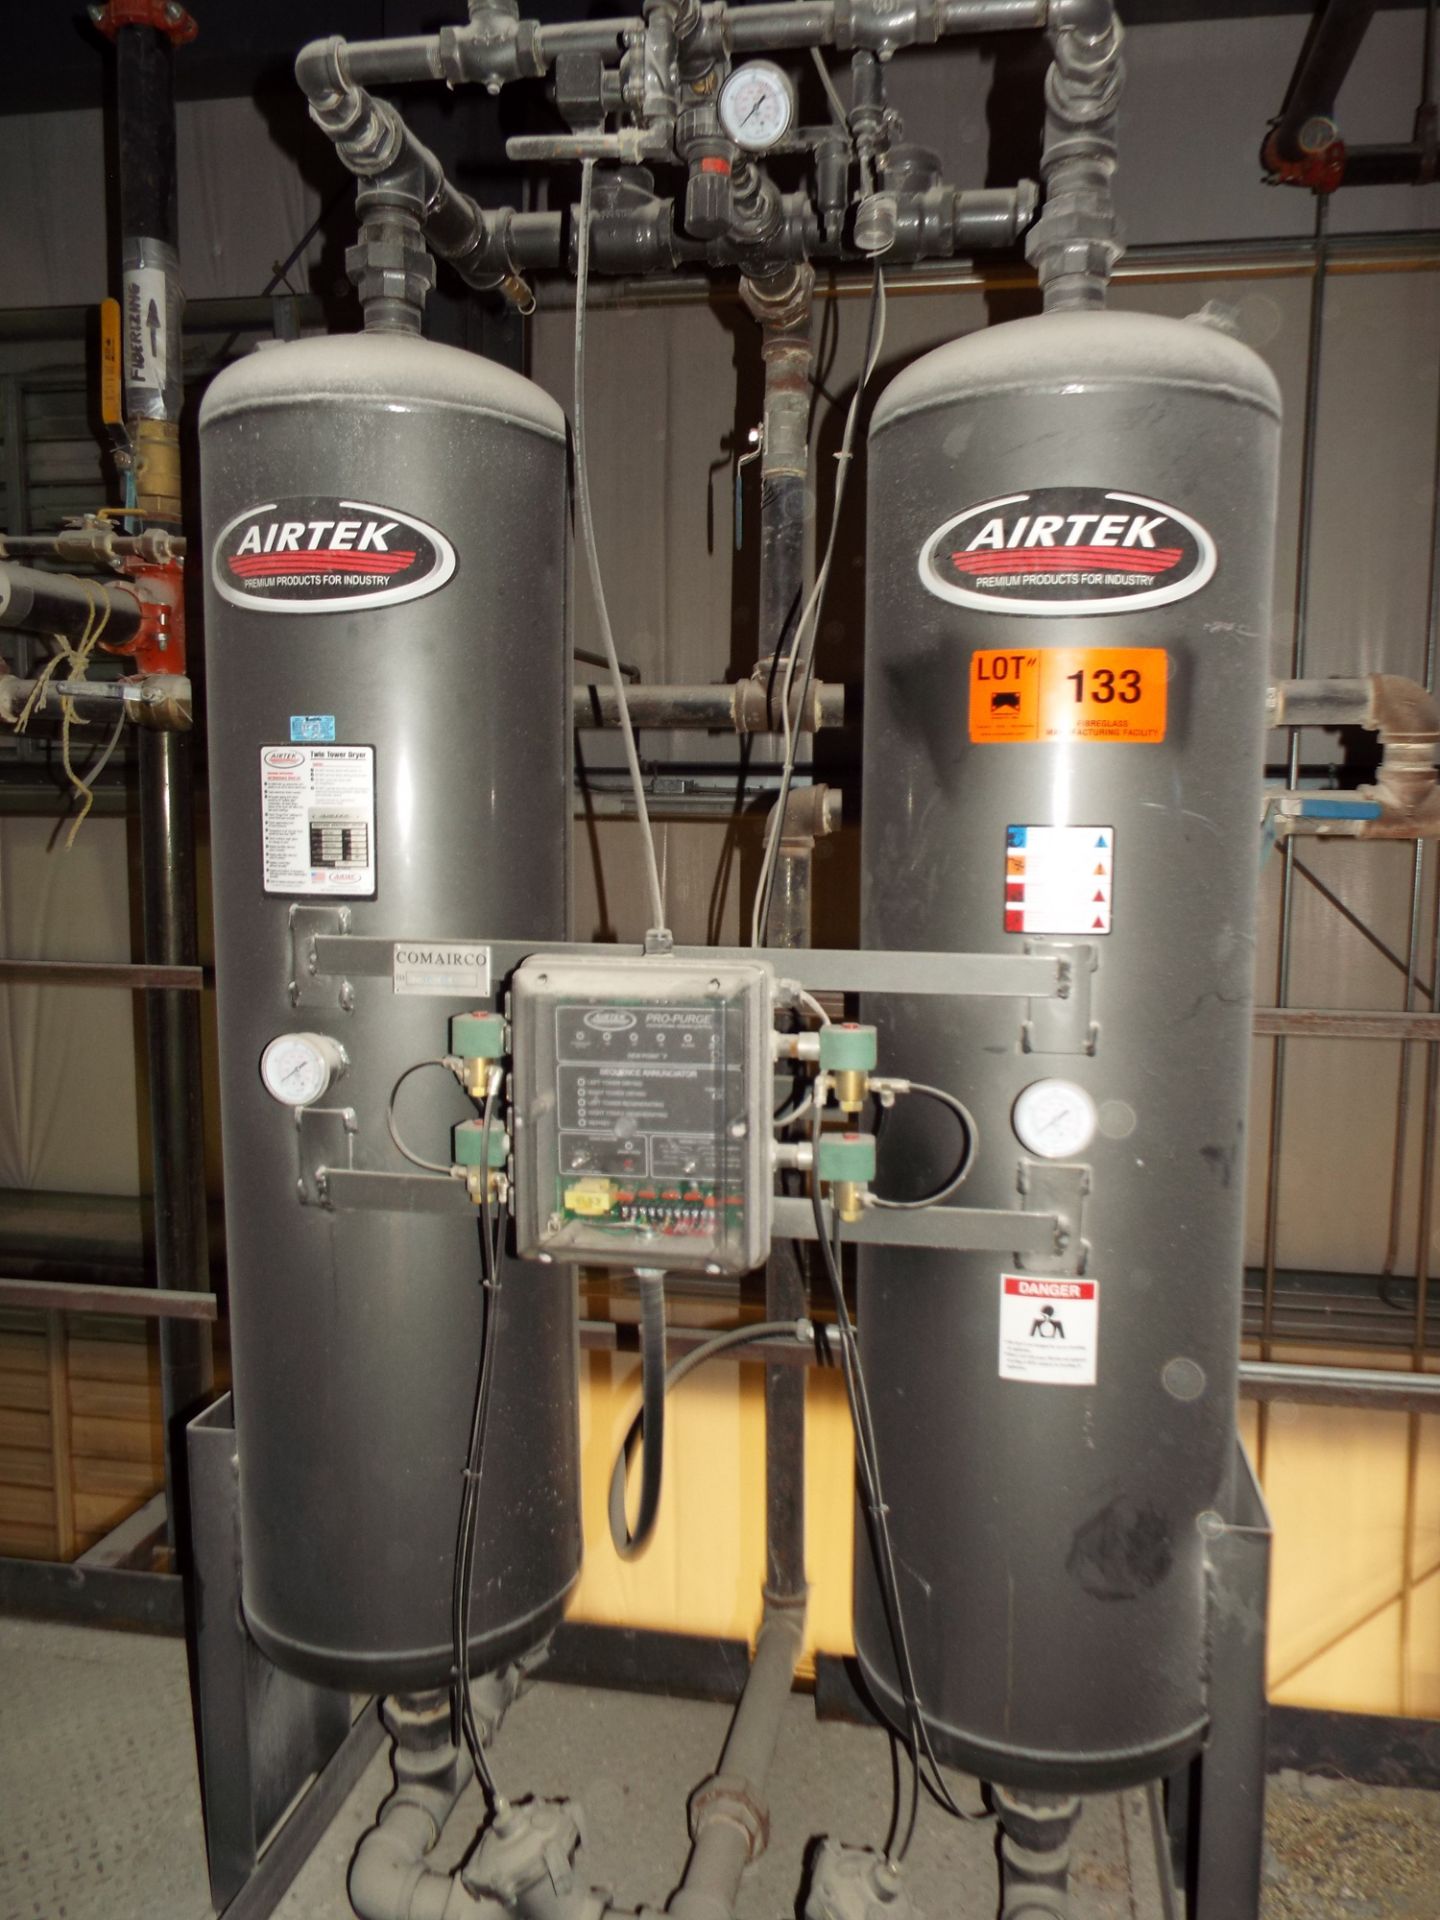 AIRTEK TW500 TWIN TOWER DESICCANT AIR DRYER SYSTEM WITH AIR COOLED HEAT EXCHANGER AND COOLING